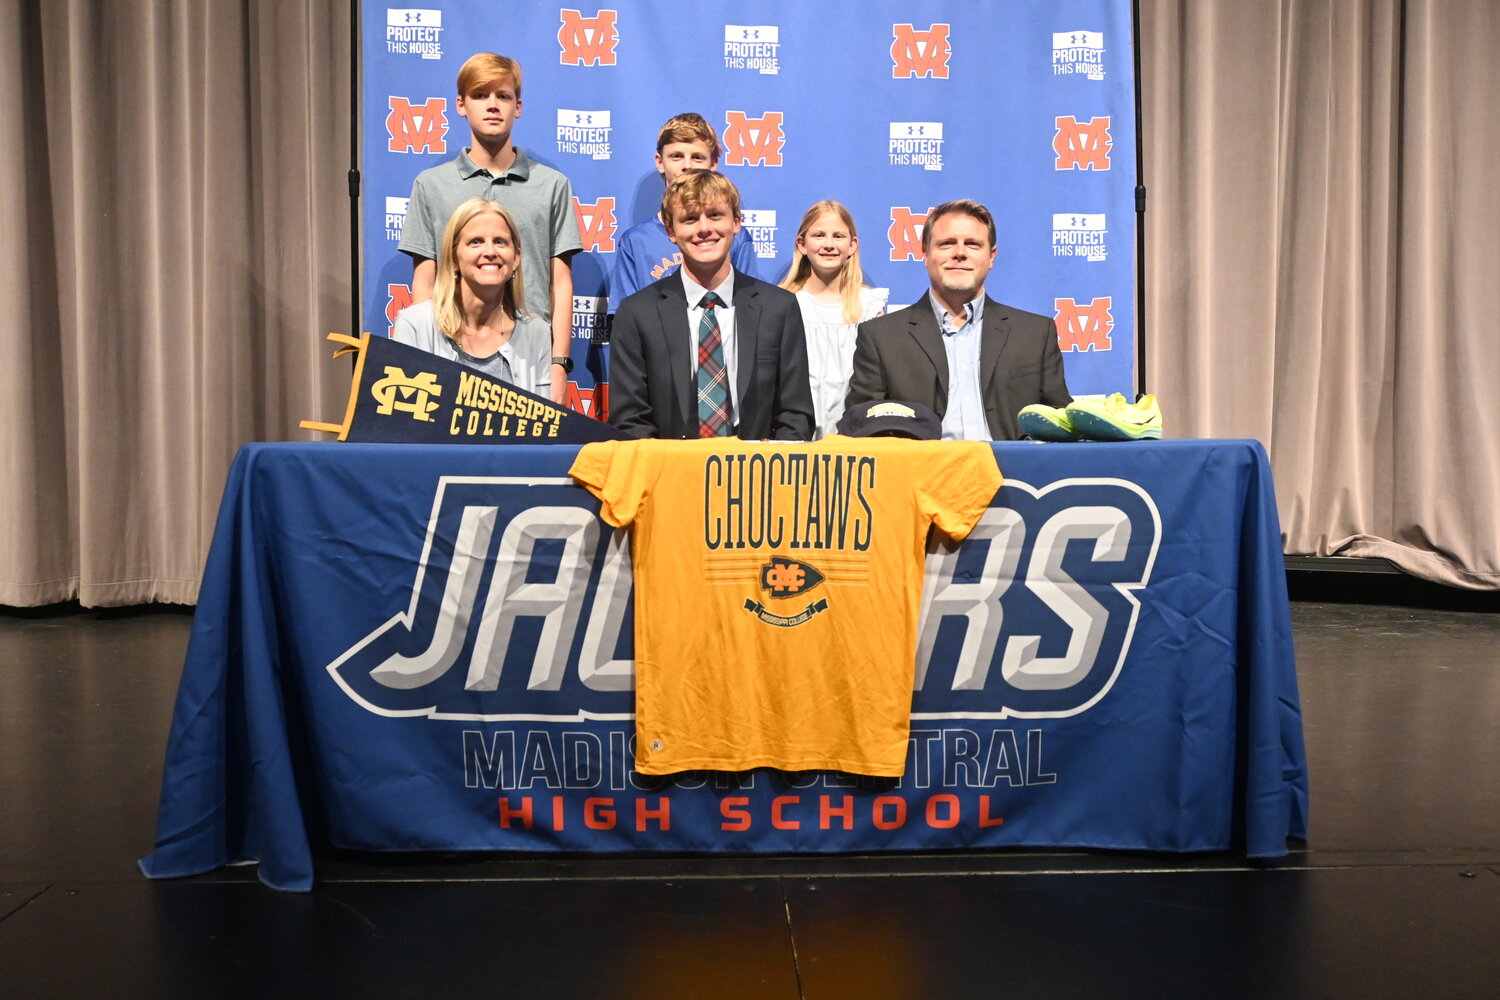 Madison Central High School senior Colin Brannon signed a national letter of intent to run cross country and track at Mississippi College. Seated left to right are Jennifer Brannon (mom), Brannon, and Jeff Brannon (dad). Standing left to right are Drew Brannon (brother), Evan Brannon (brother), and Kate Brannon (sister).